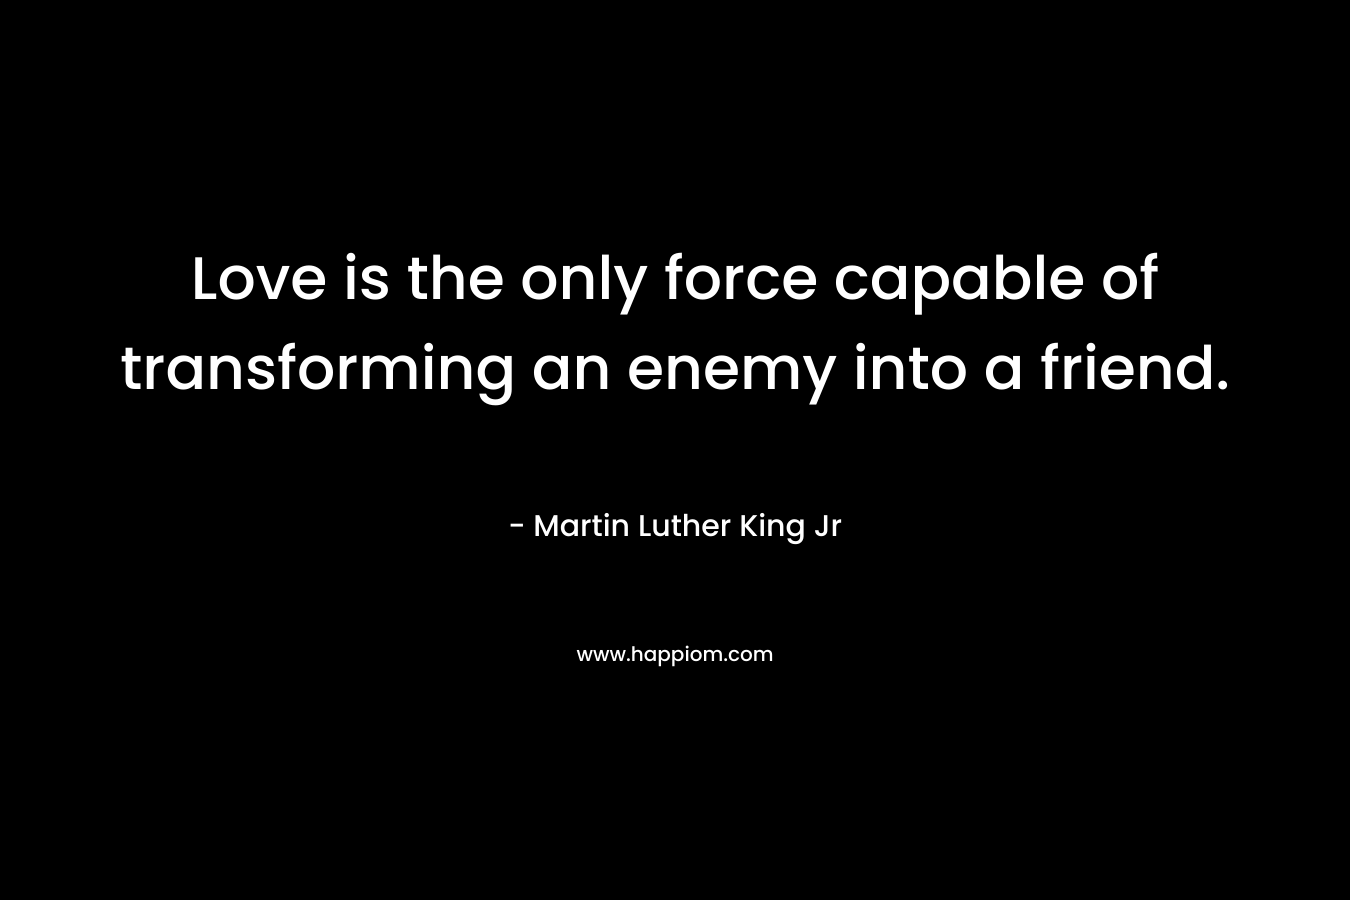 Love is the only force capable of transforming an enemy into a friend. – Martin Luther King Jr